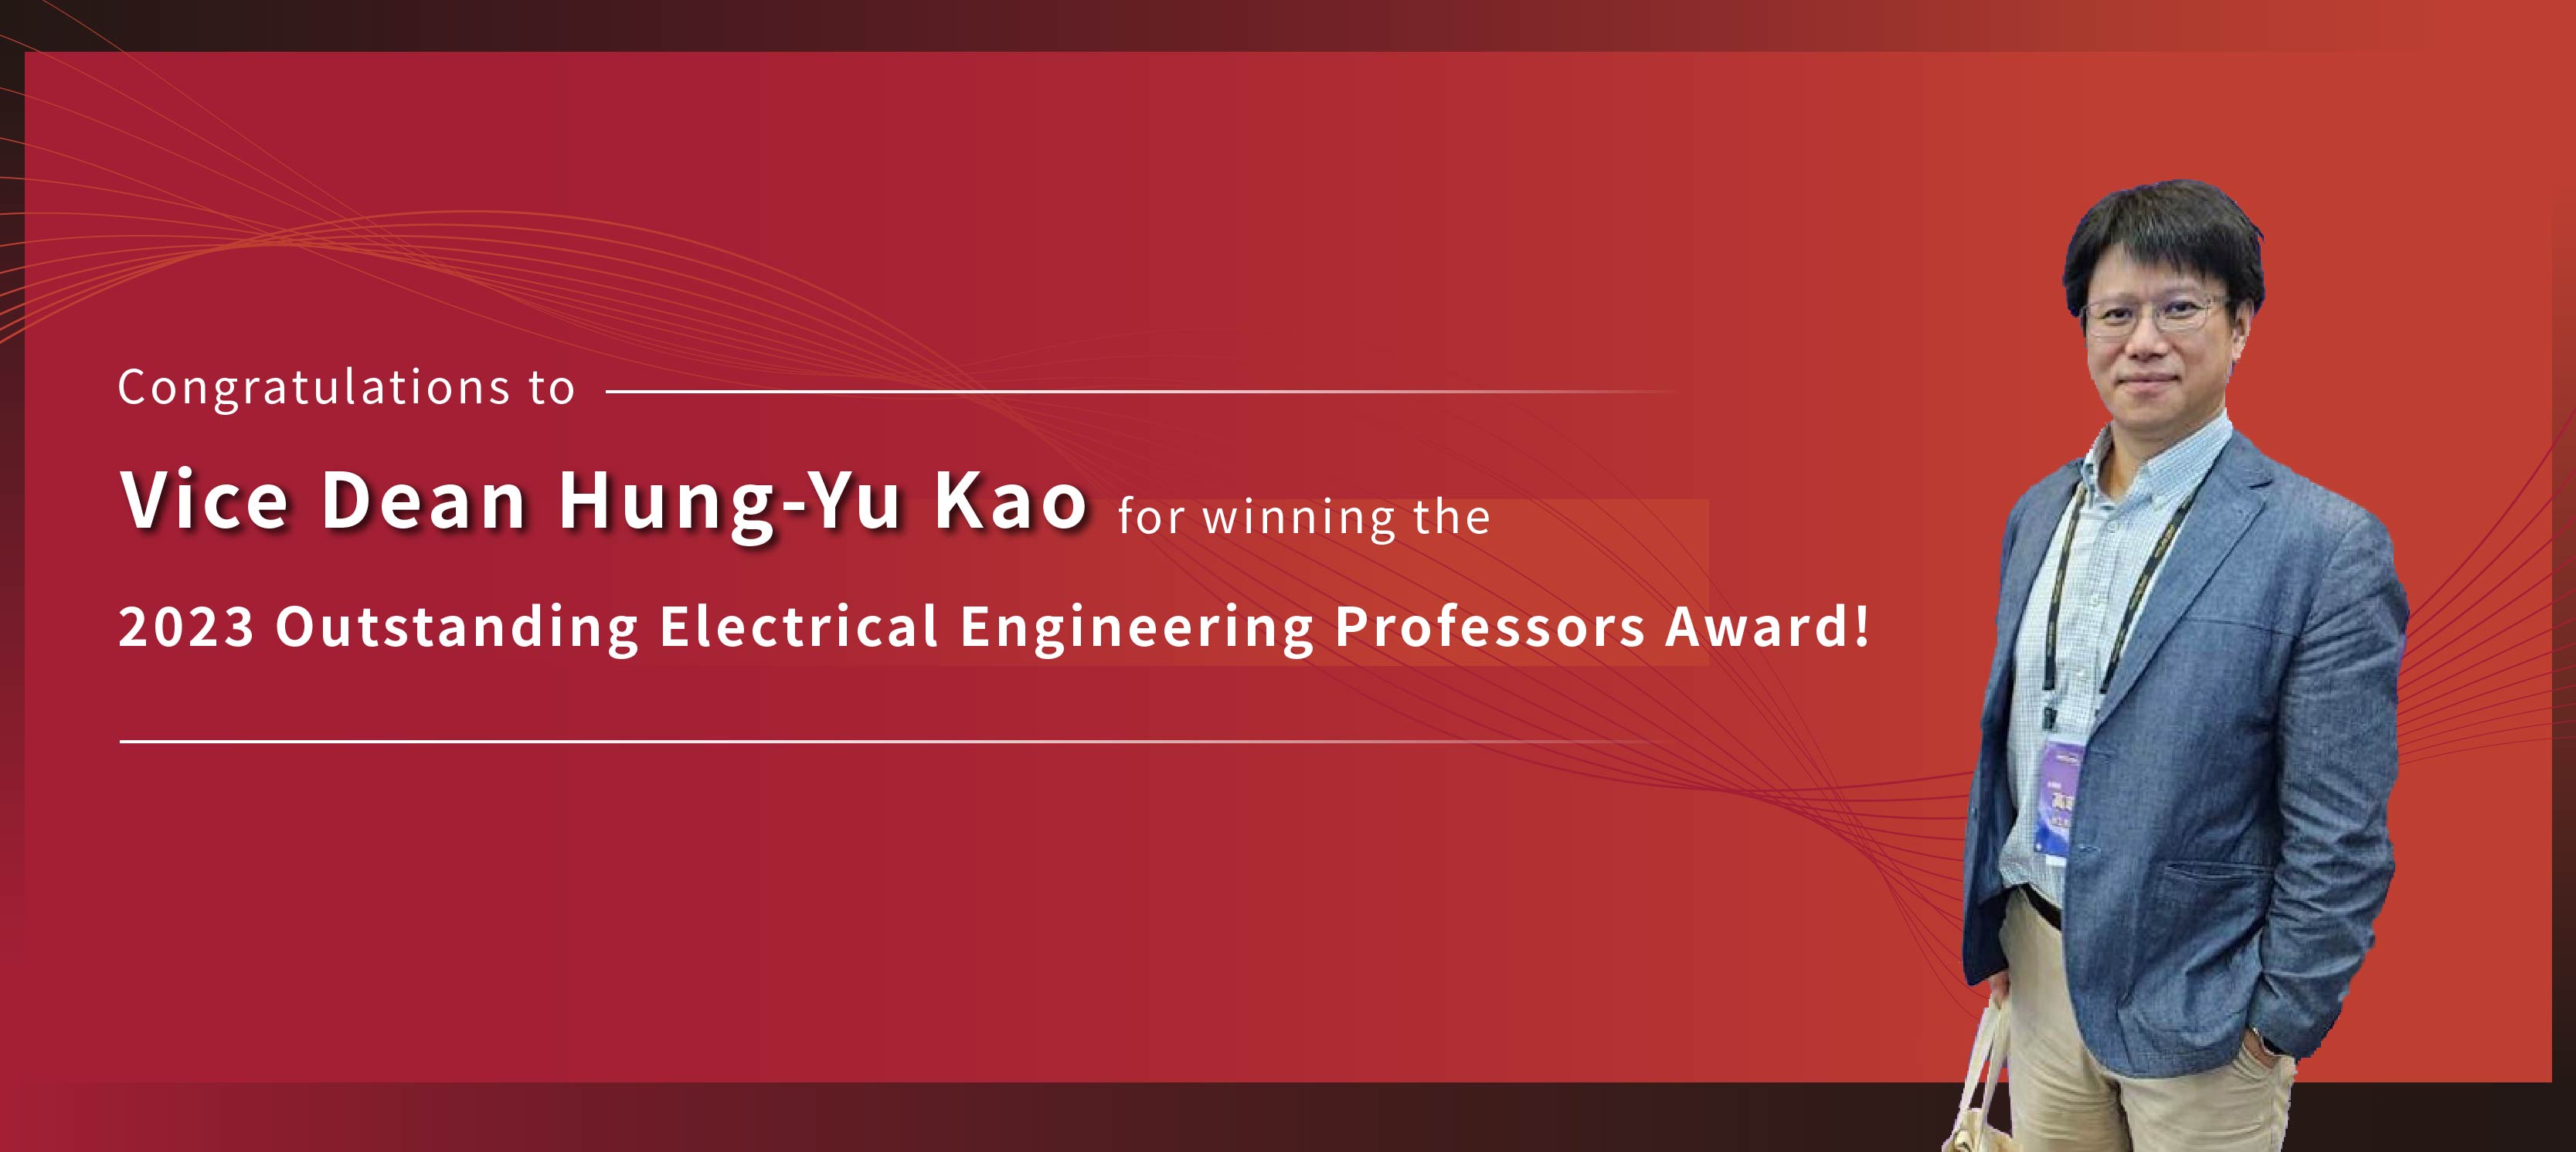 Congratulations to Vice Dean Hung-Yu Kao for winning the 2023 Outstanding Electrical Engineering Professors Award!